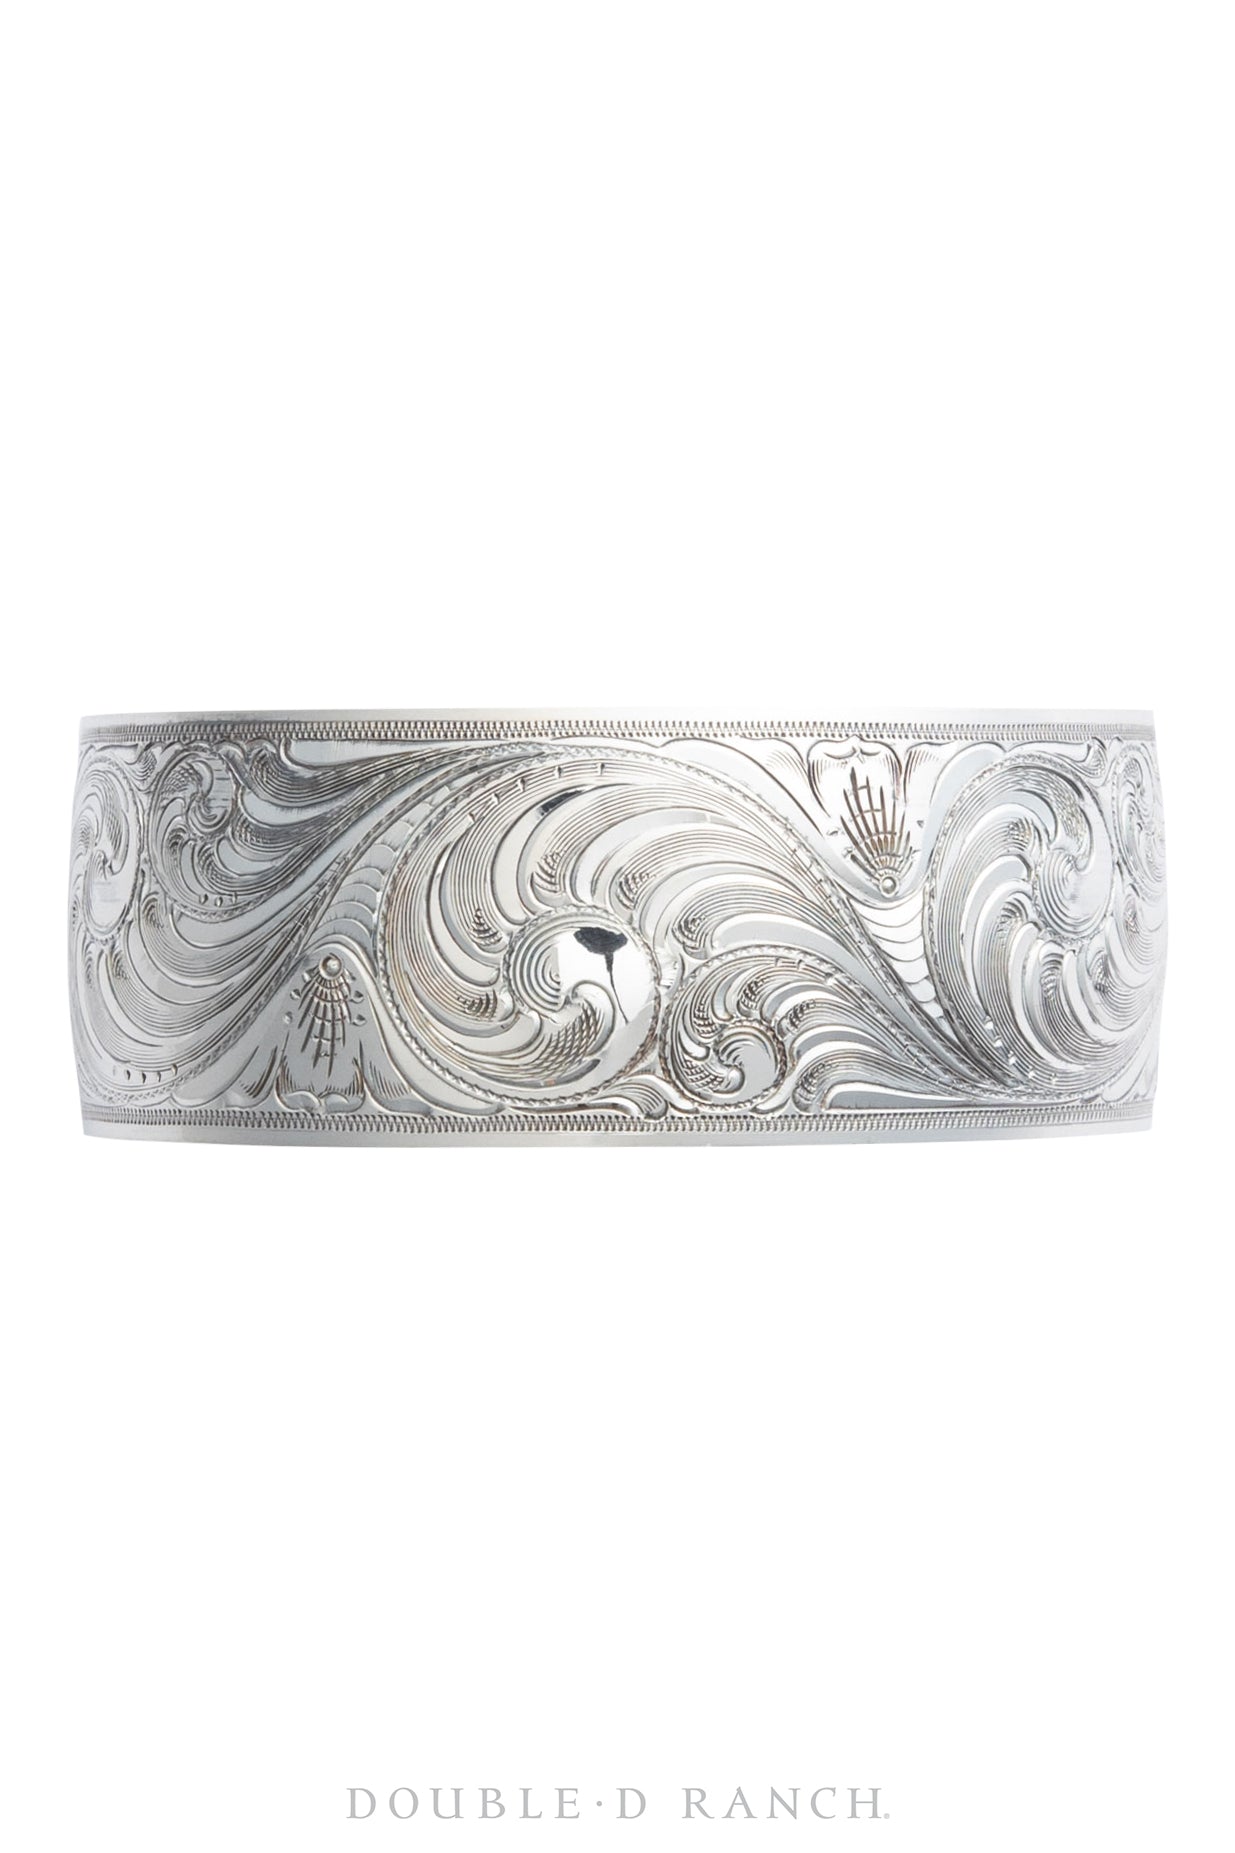 Cuff, Engraved, Sterling Silver, Western Scroll, Artisan, Contemporary, 3303